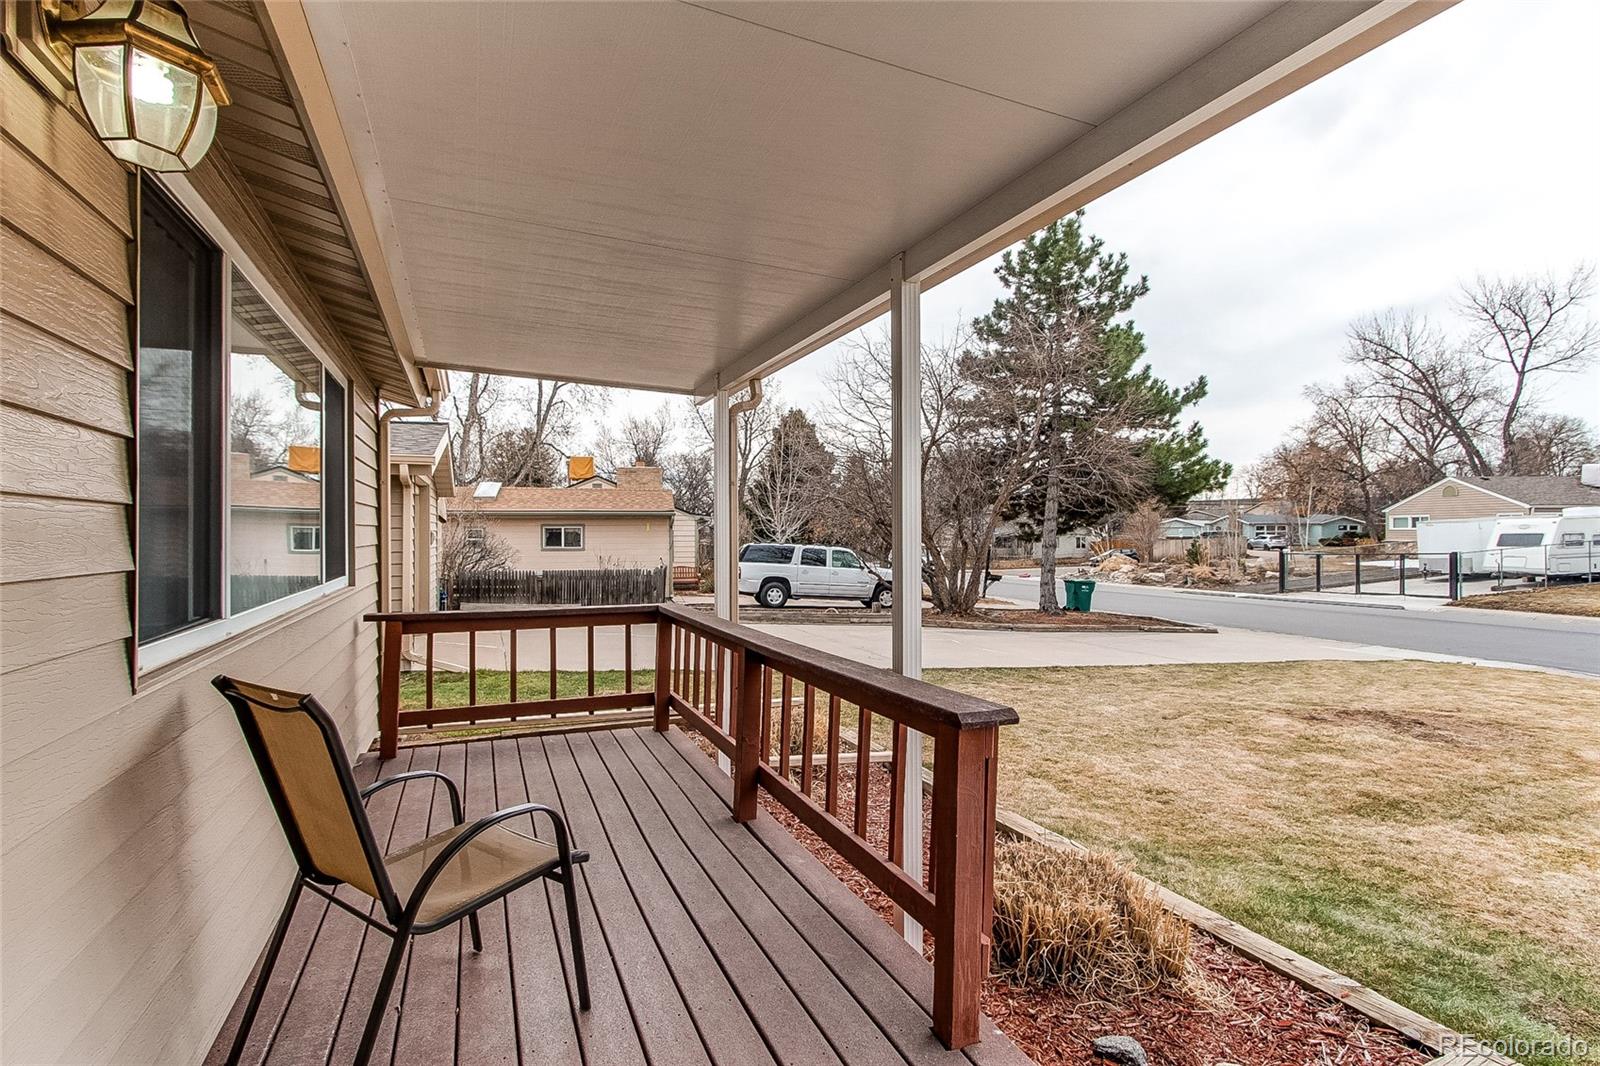 Report Image for 10245 W 8th Place,Lakewood, Colorado